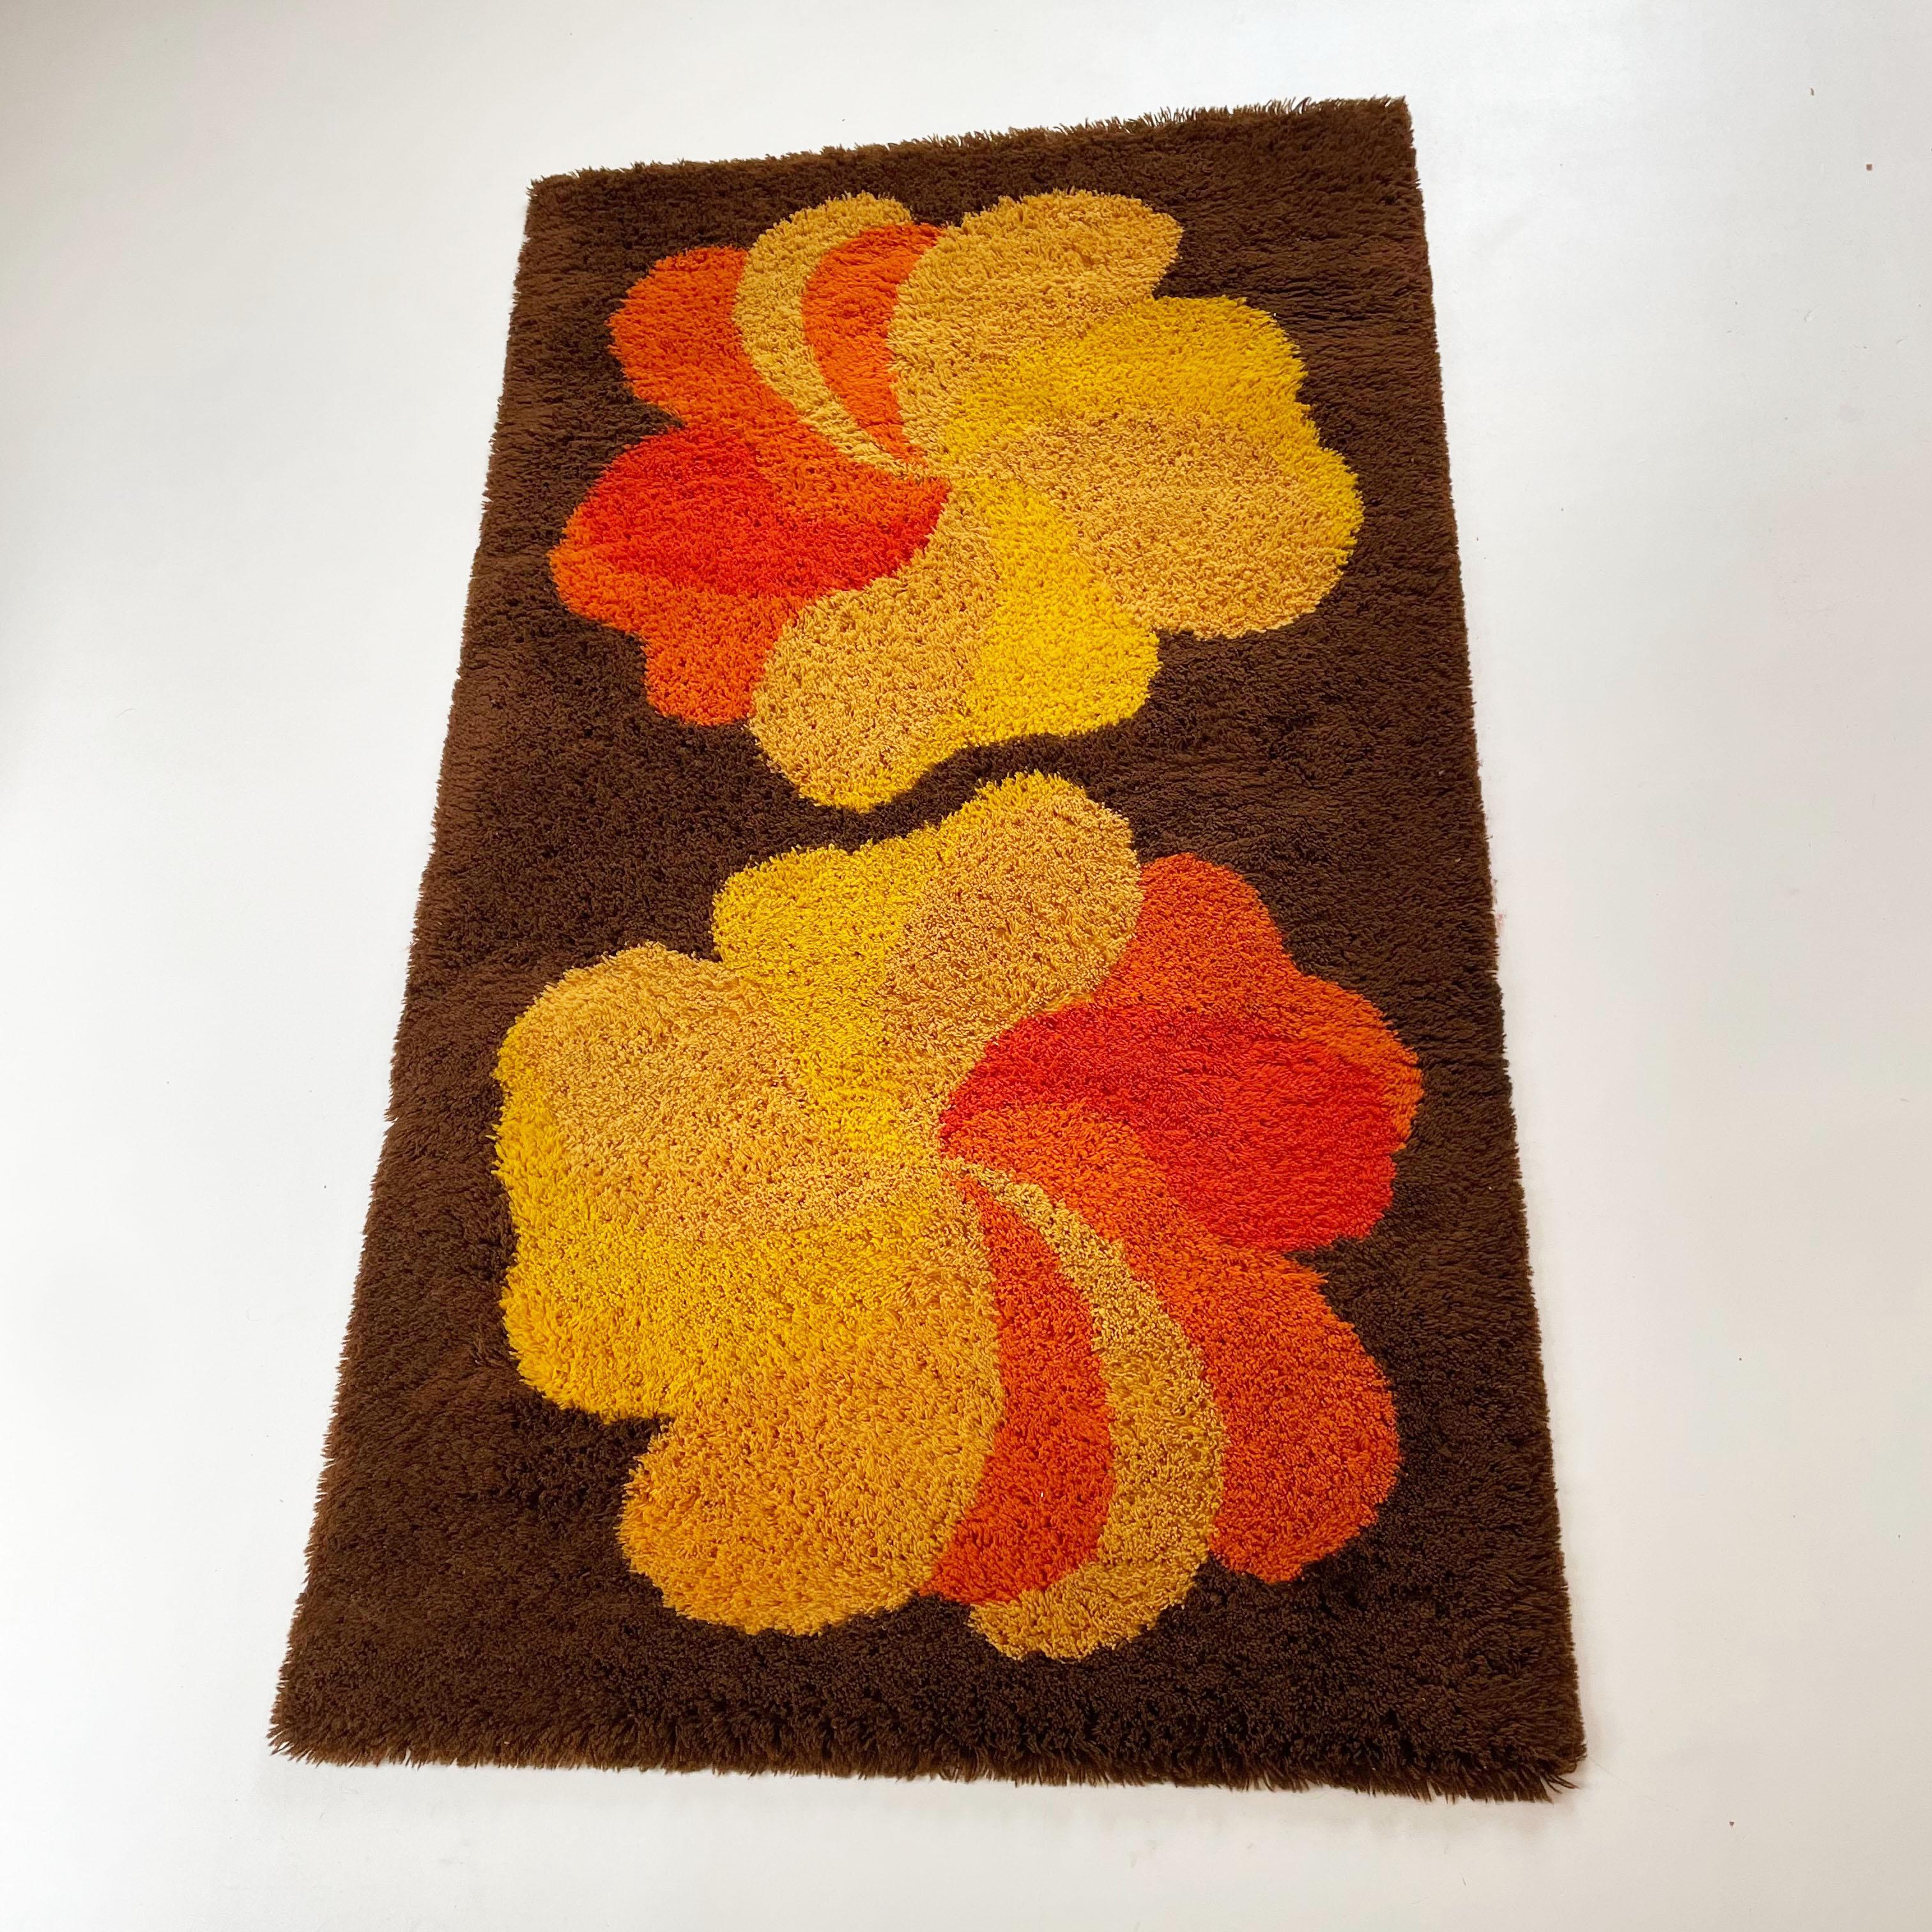 1970s style rugs